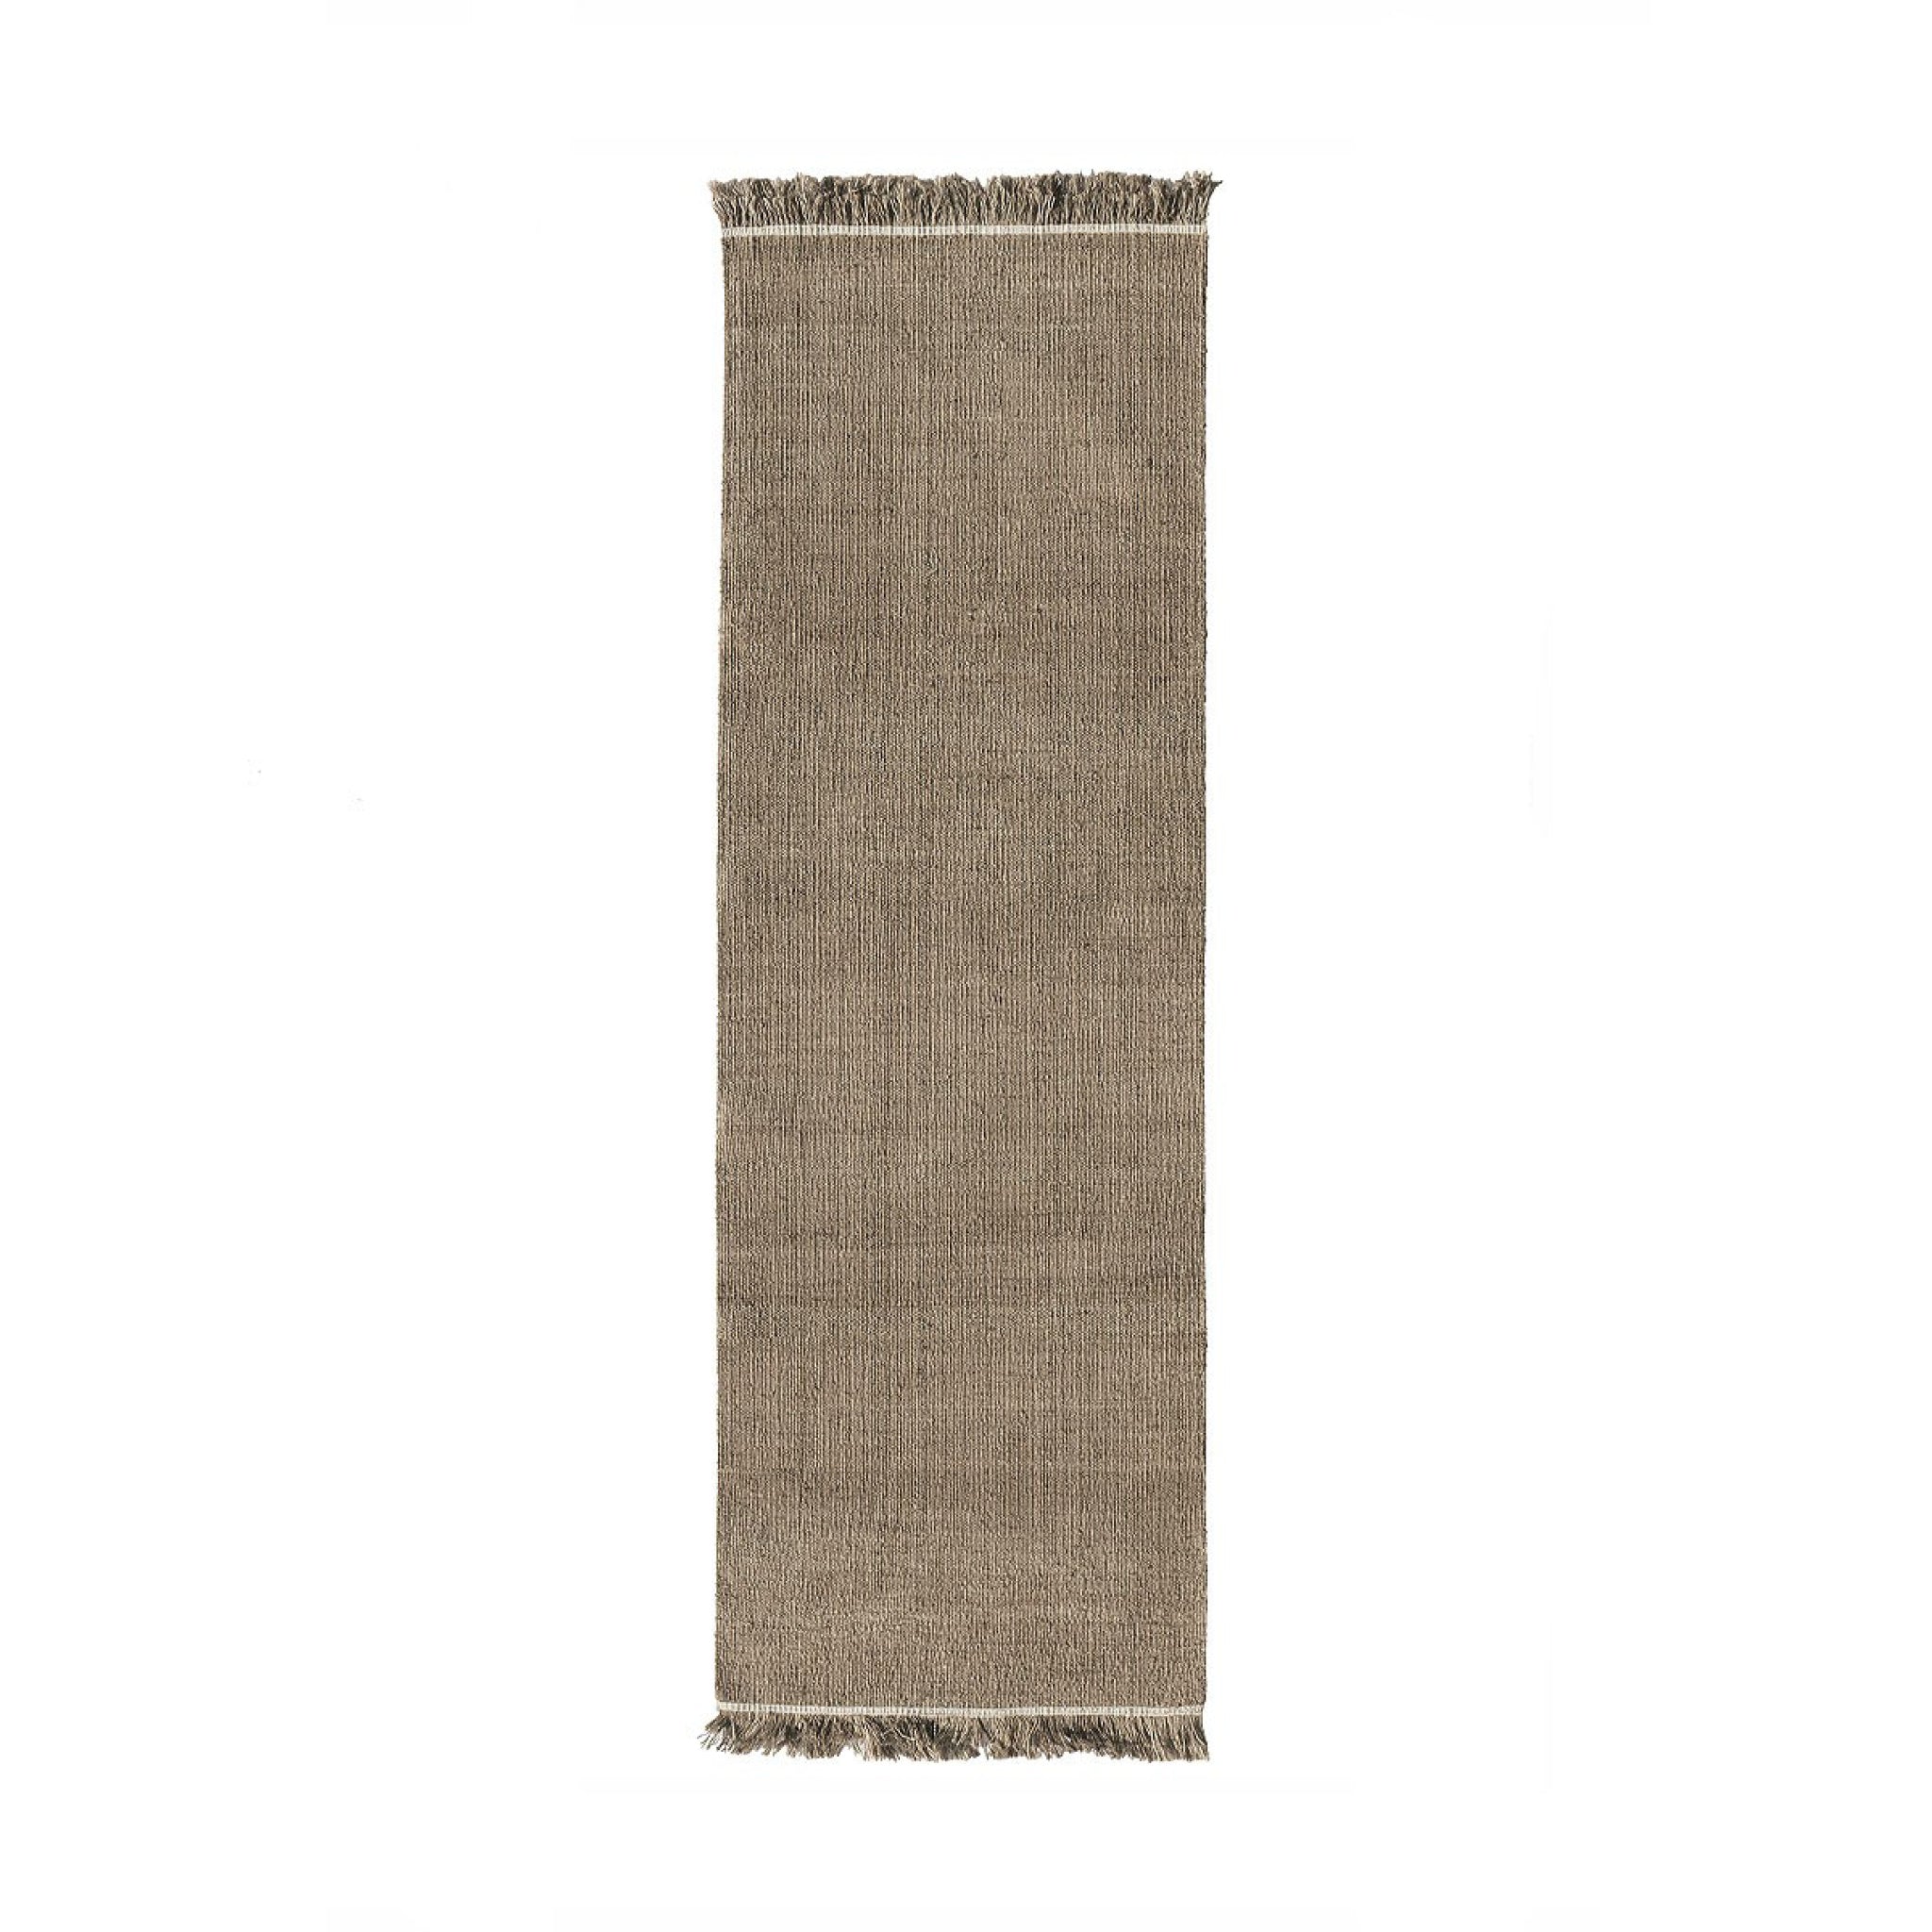 Wellbeing Nettle Dhurrie Rug by Nanimarquina